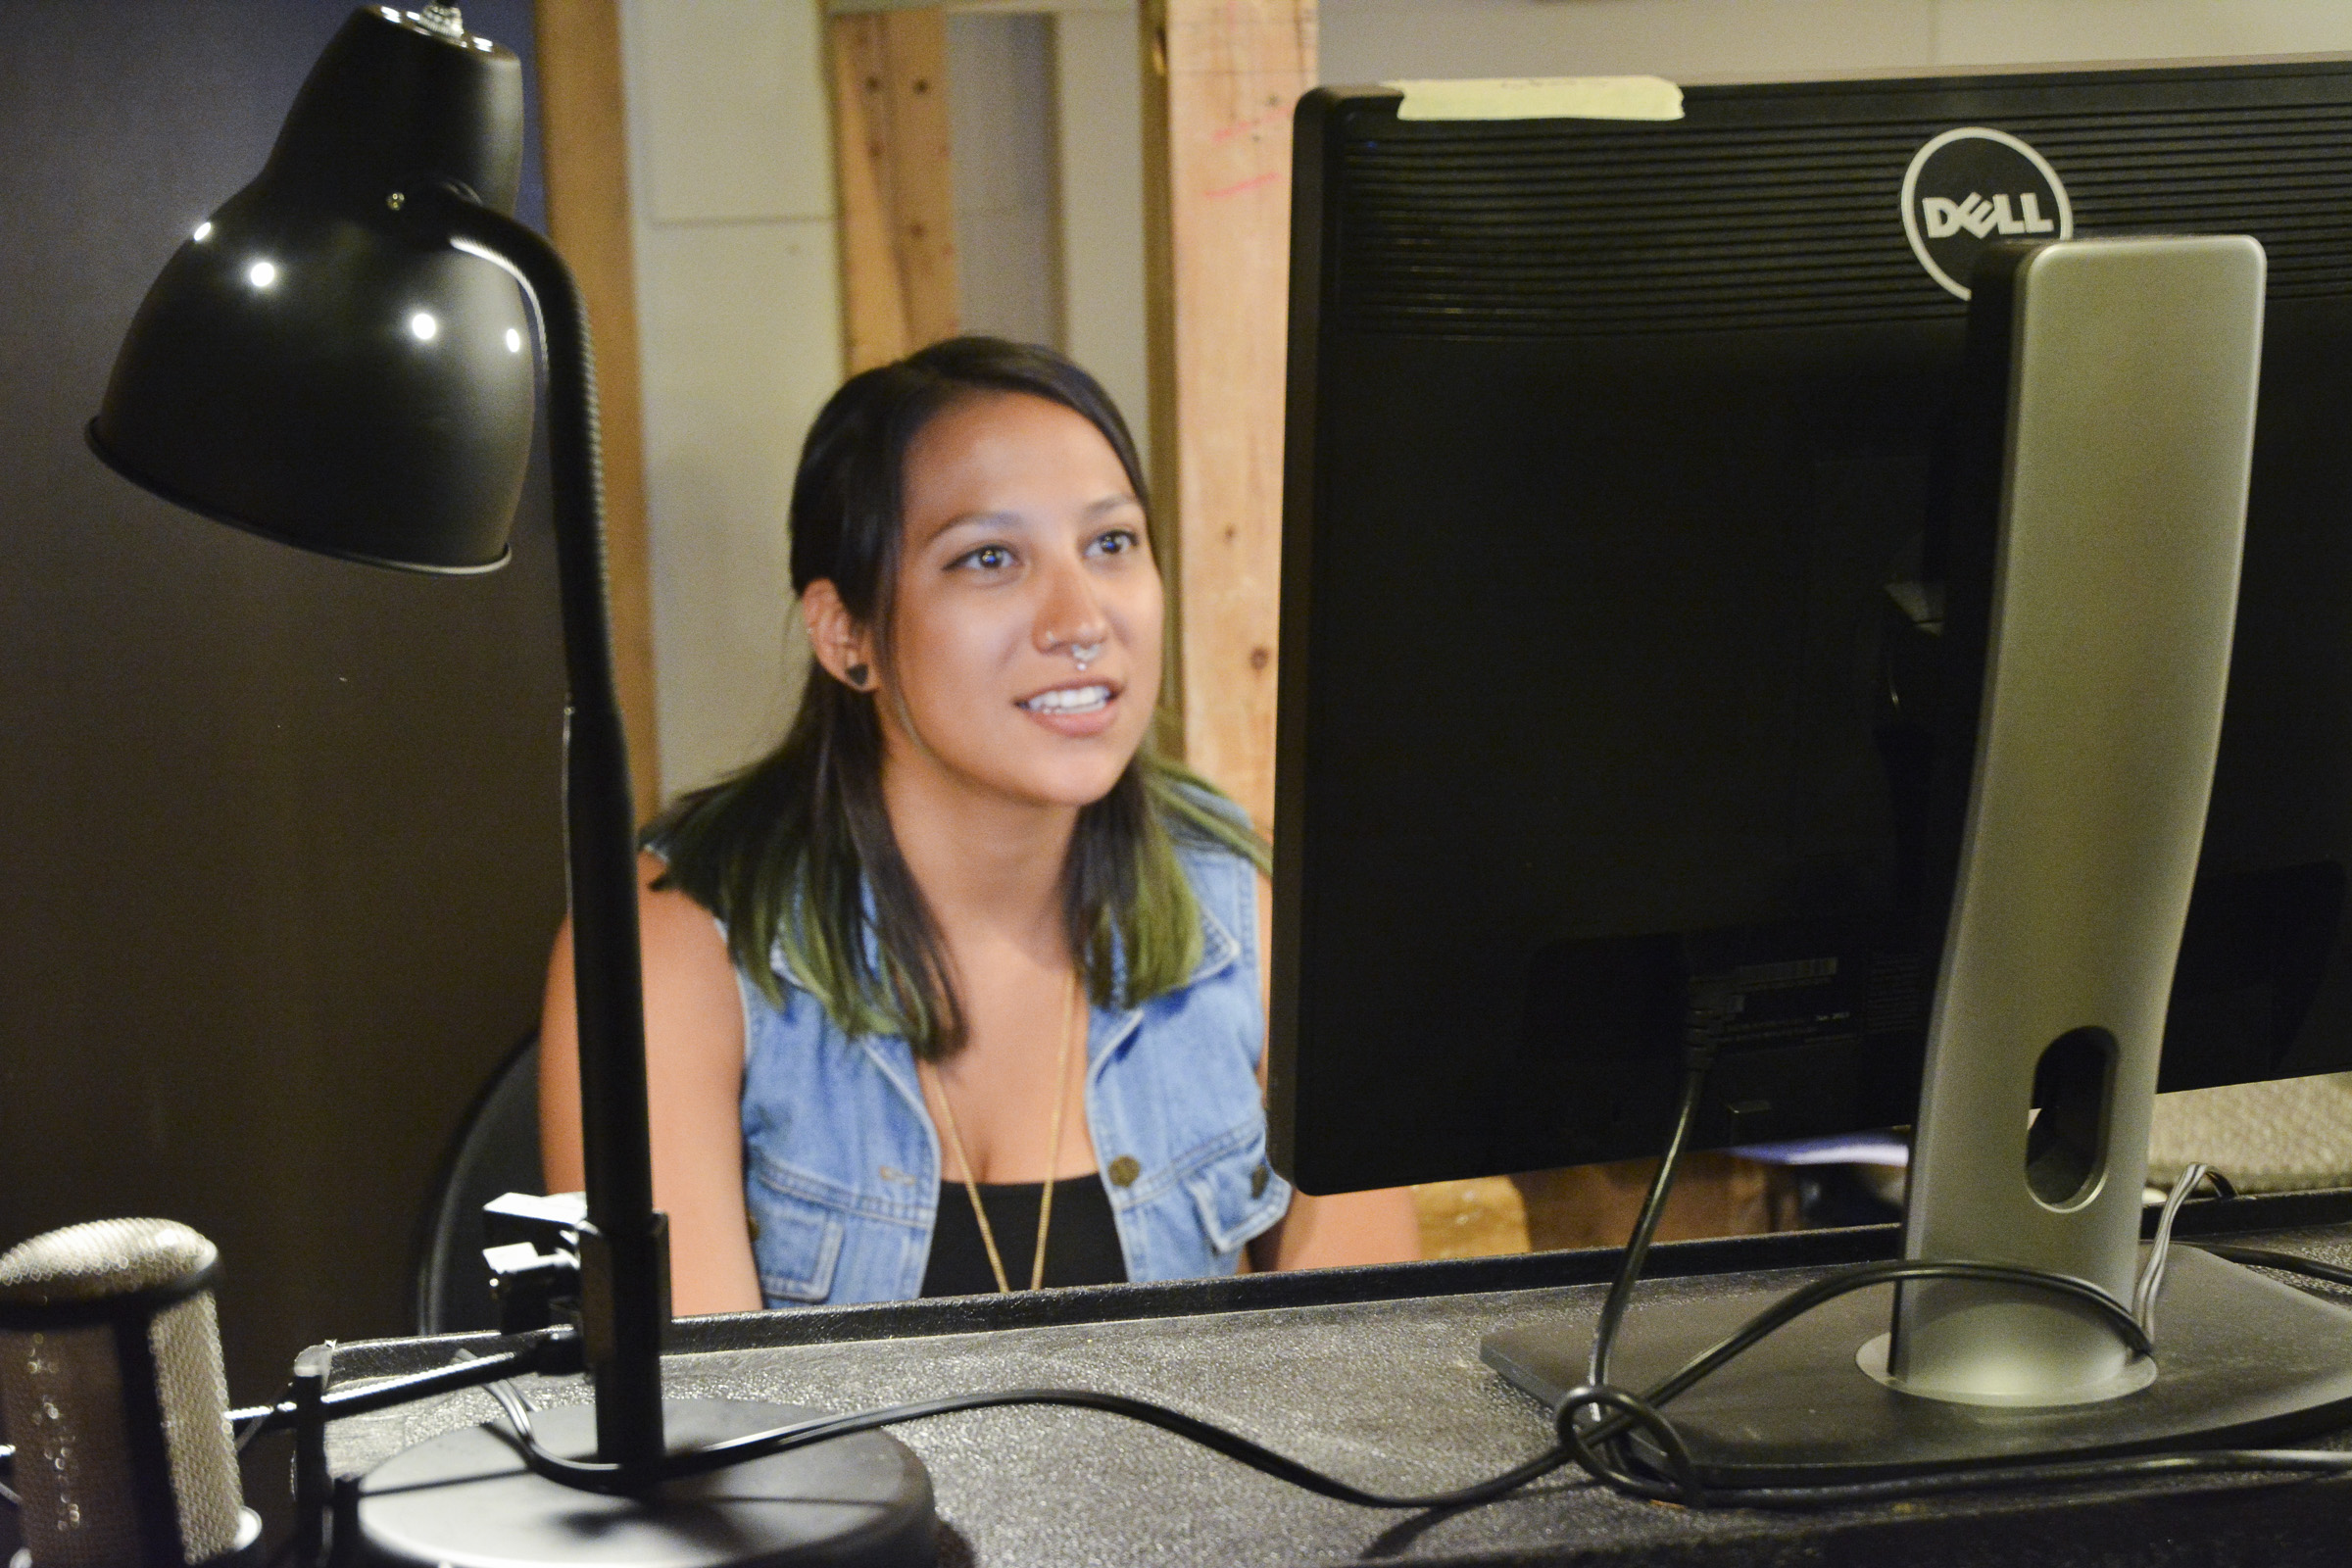 Museum volunteer Trinity Medellin working in the audio booth (c) Field Museum of Natural History - CC BY-NC 4.0